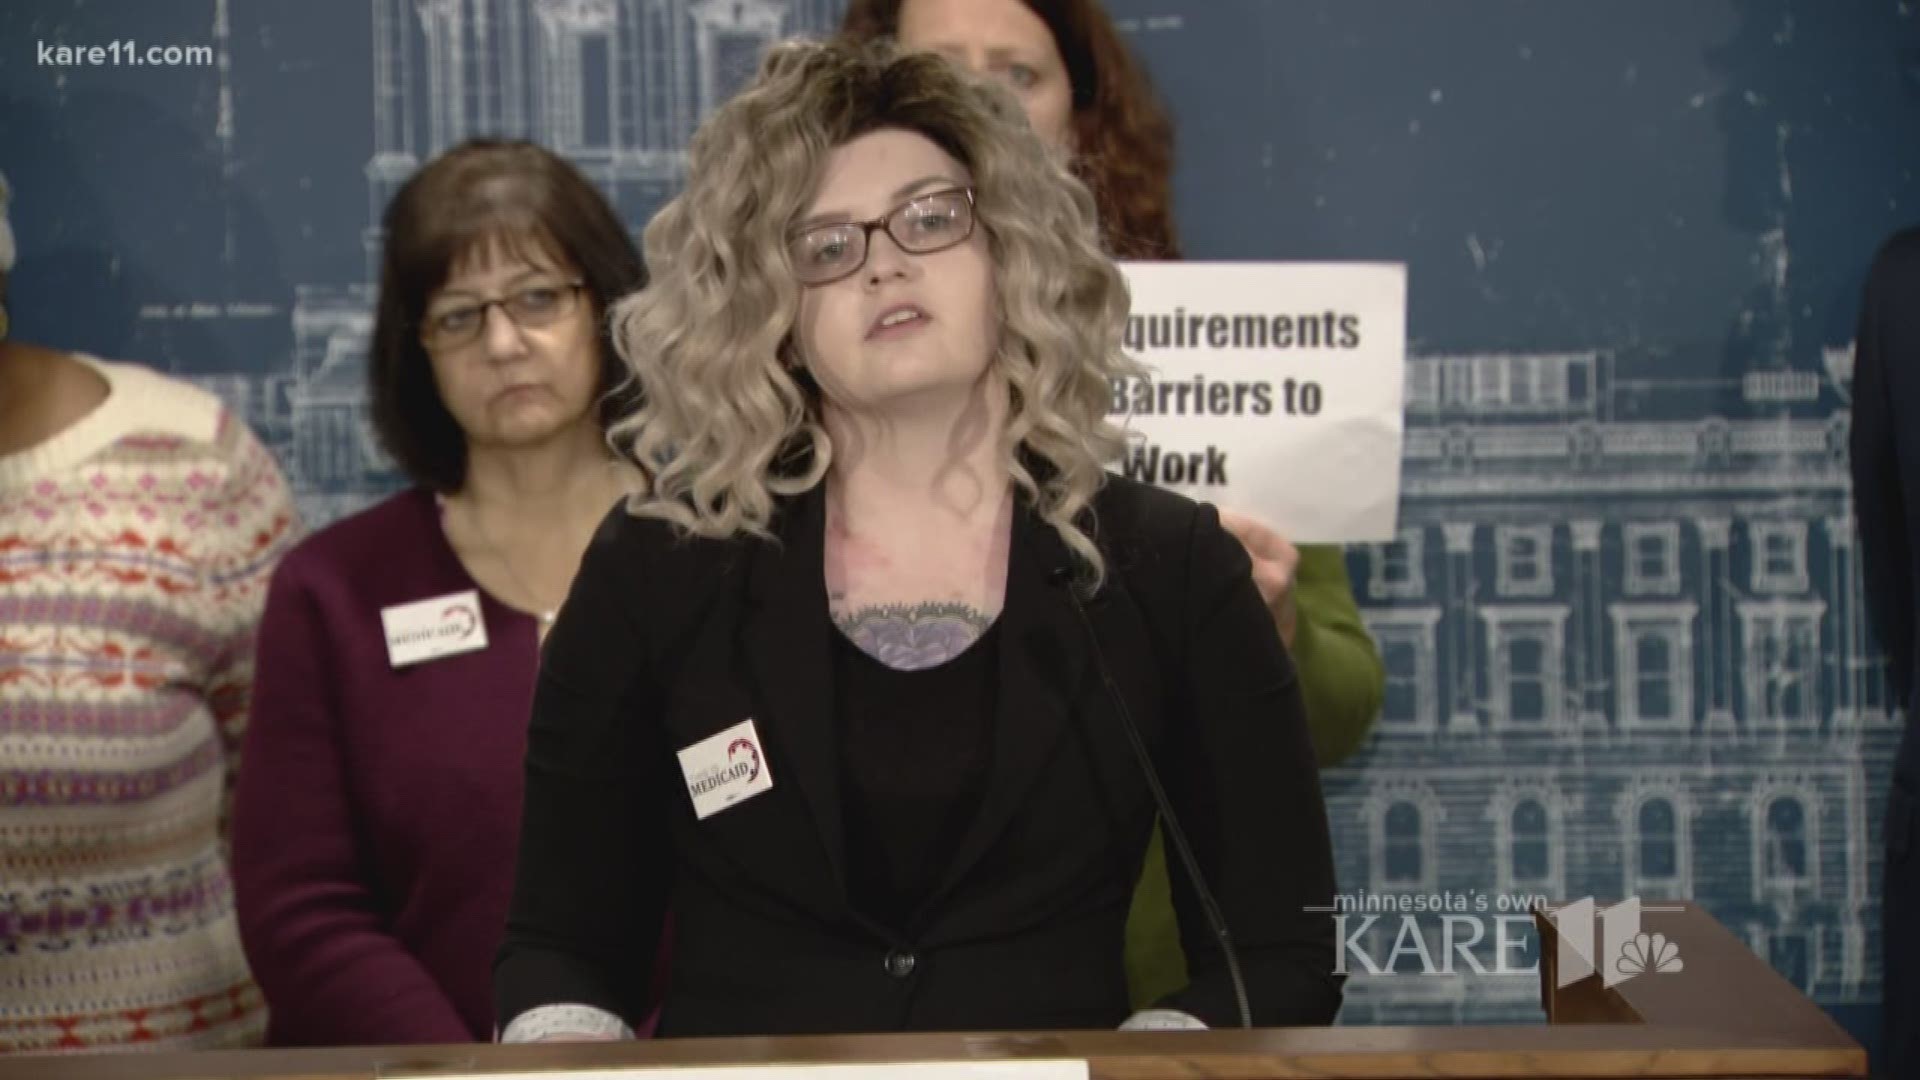 Opposition is building to possible changes in Minnesota's Medical Assistance program. Doctors and non-profit leaders stopped by the capitol to say proposed work requirements could hurt Minnesotans' access to health care.